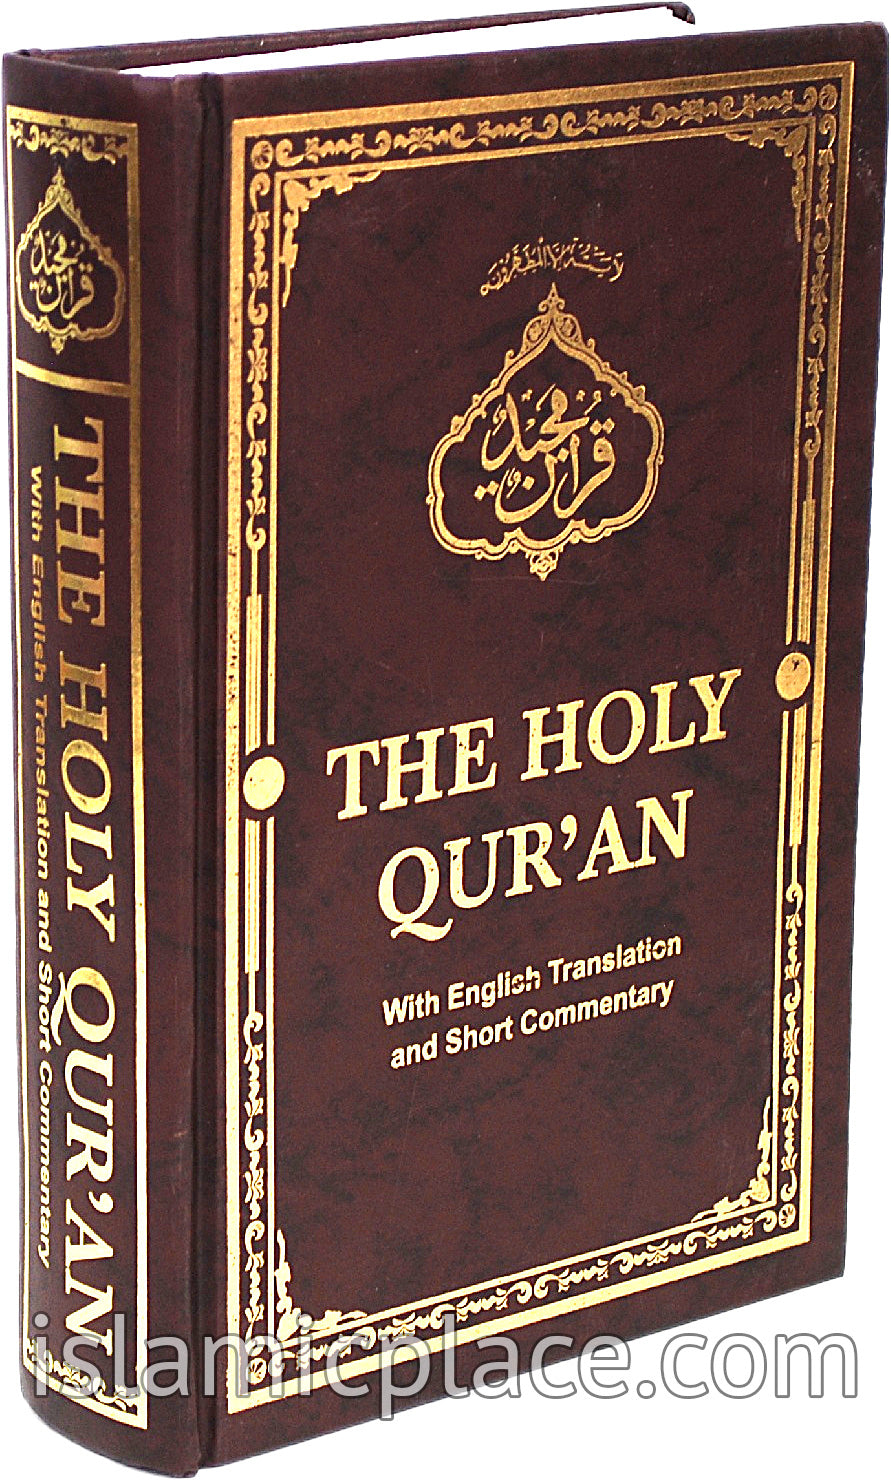 The Holy Qur'an - original Arabic With English Translation and Short Commentary